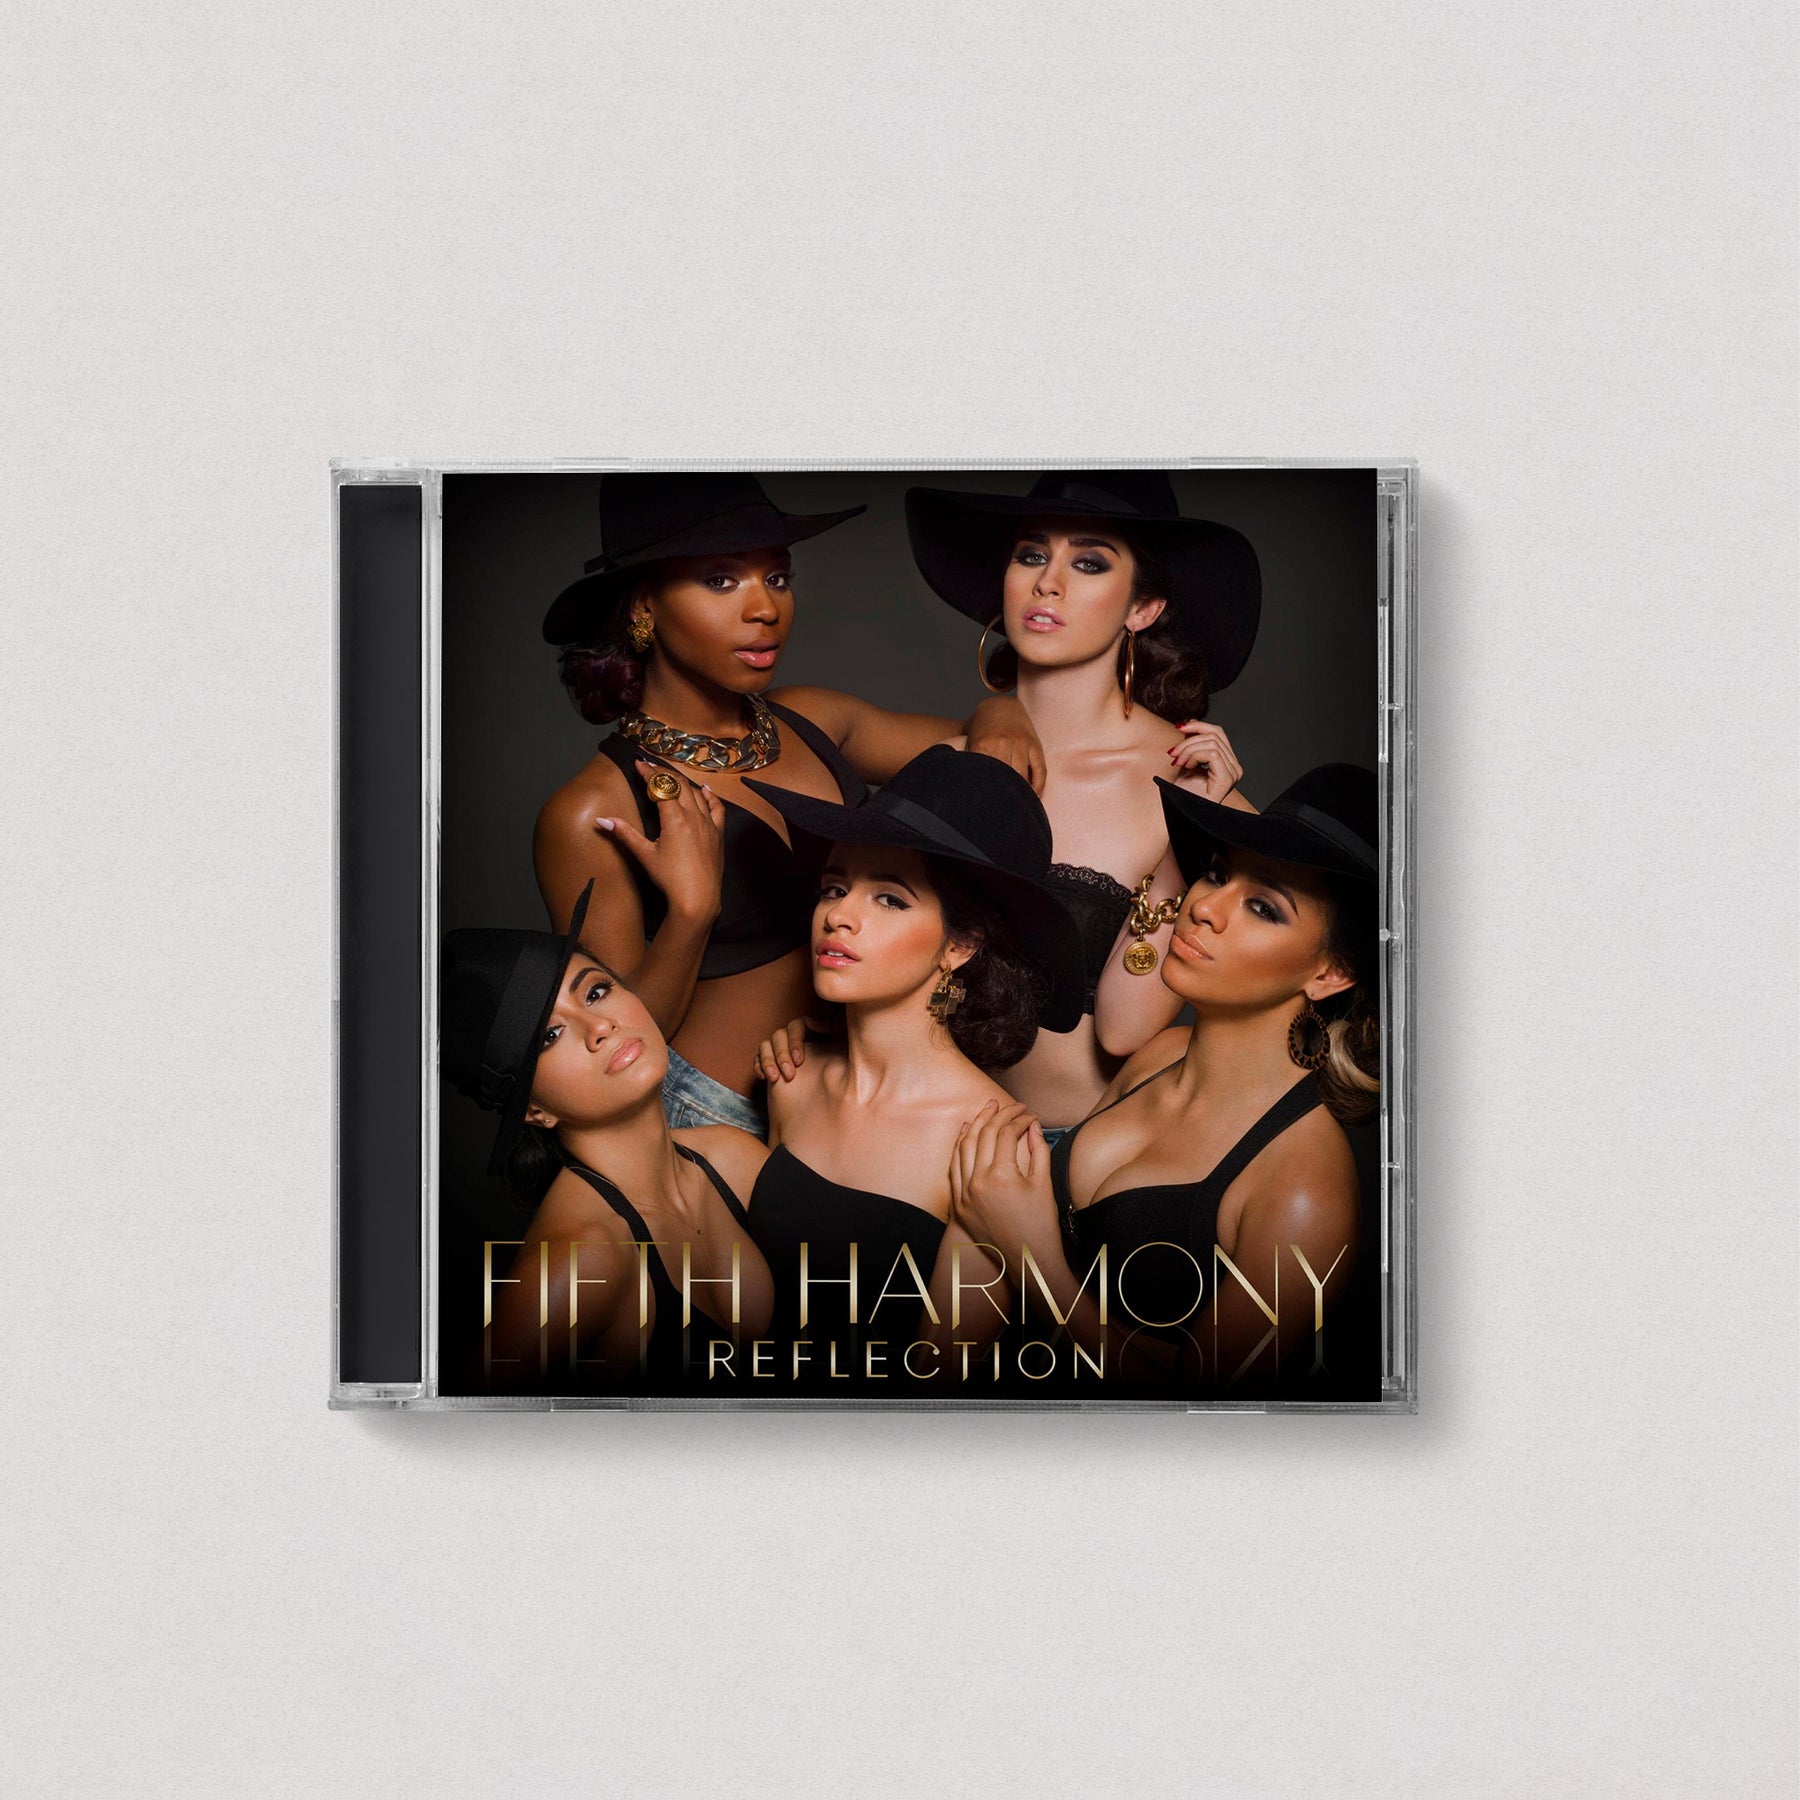 Fifth Harmony - Reflection (Deluxe Edition, CD)